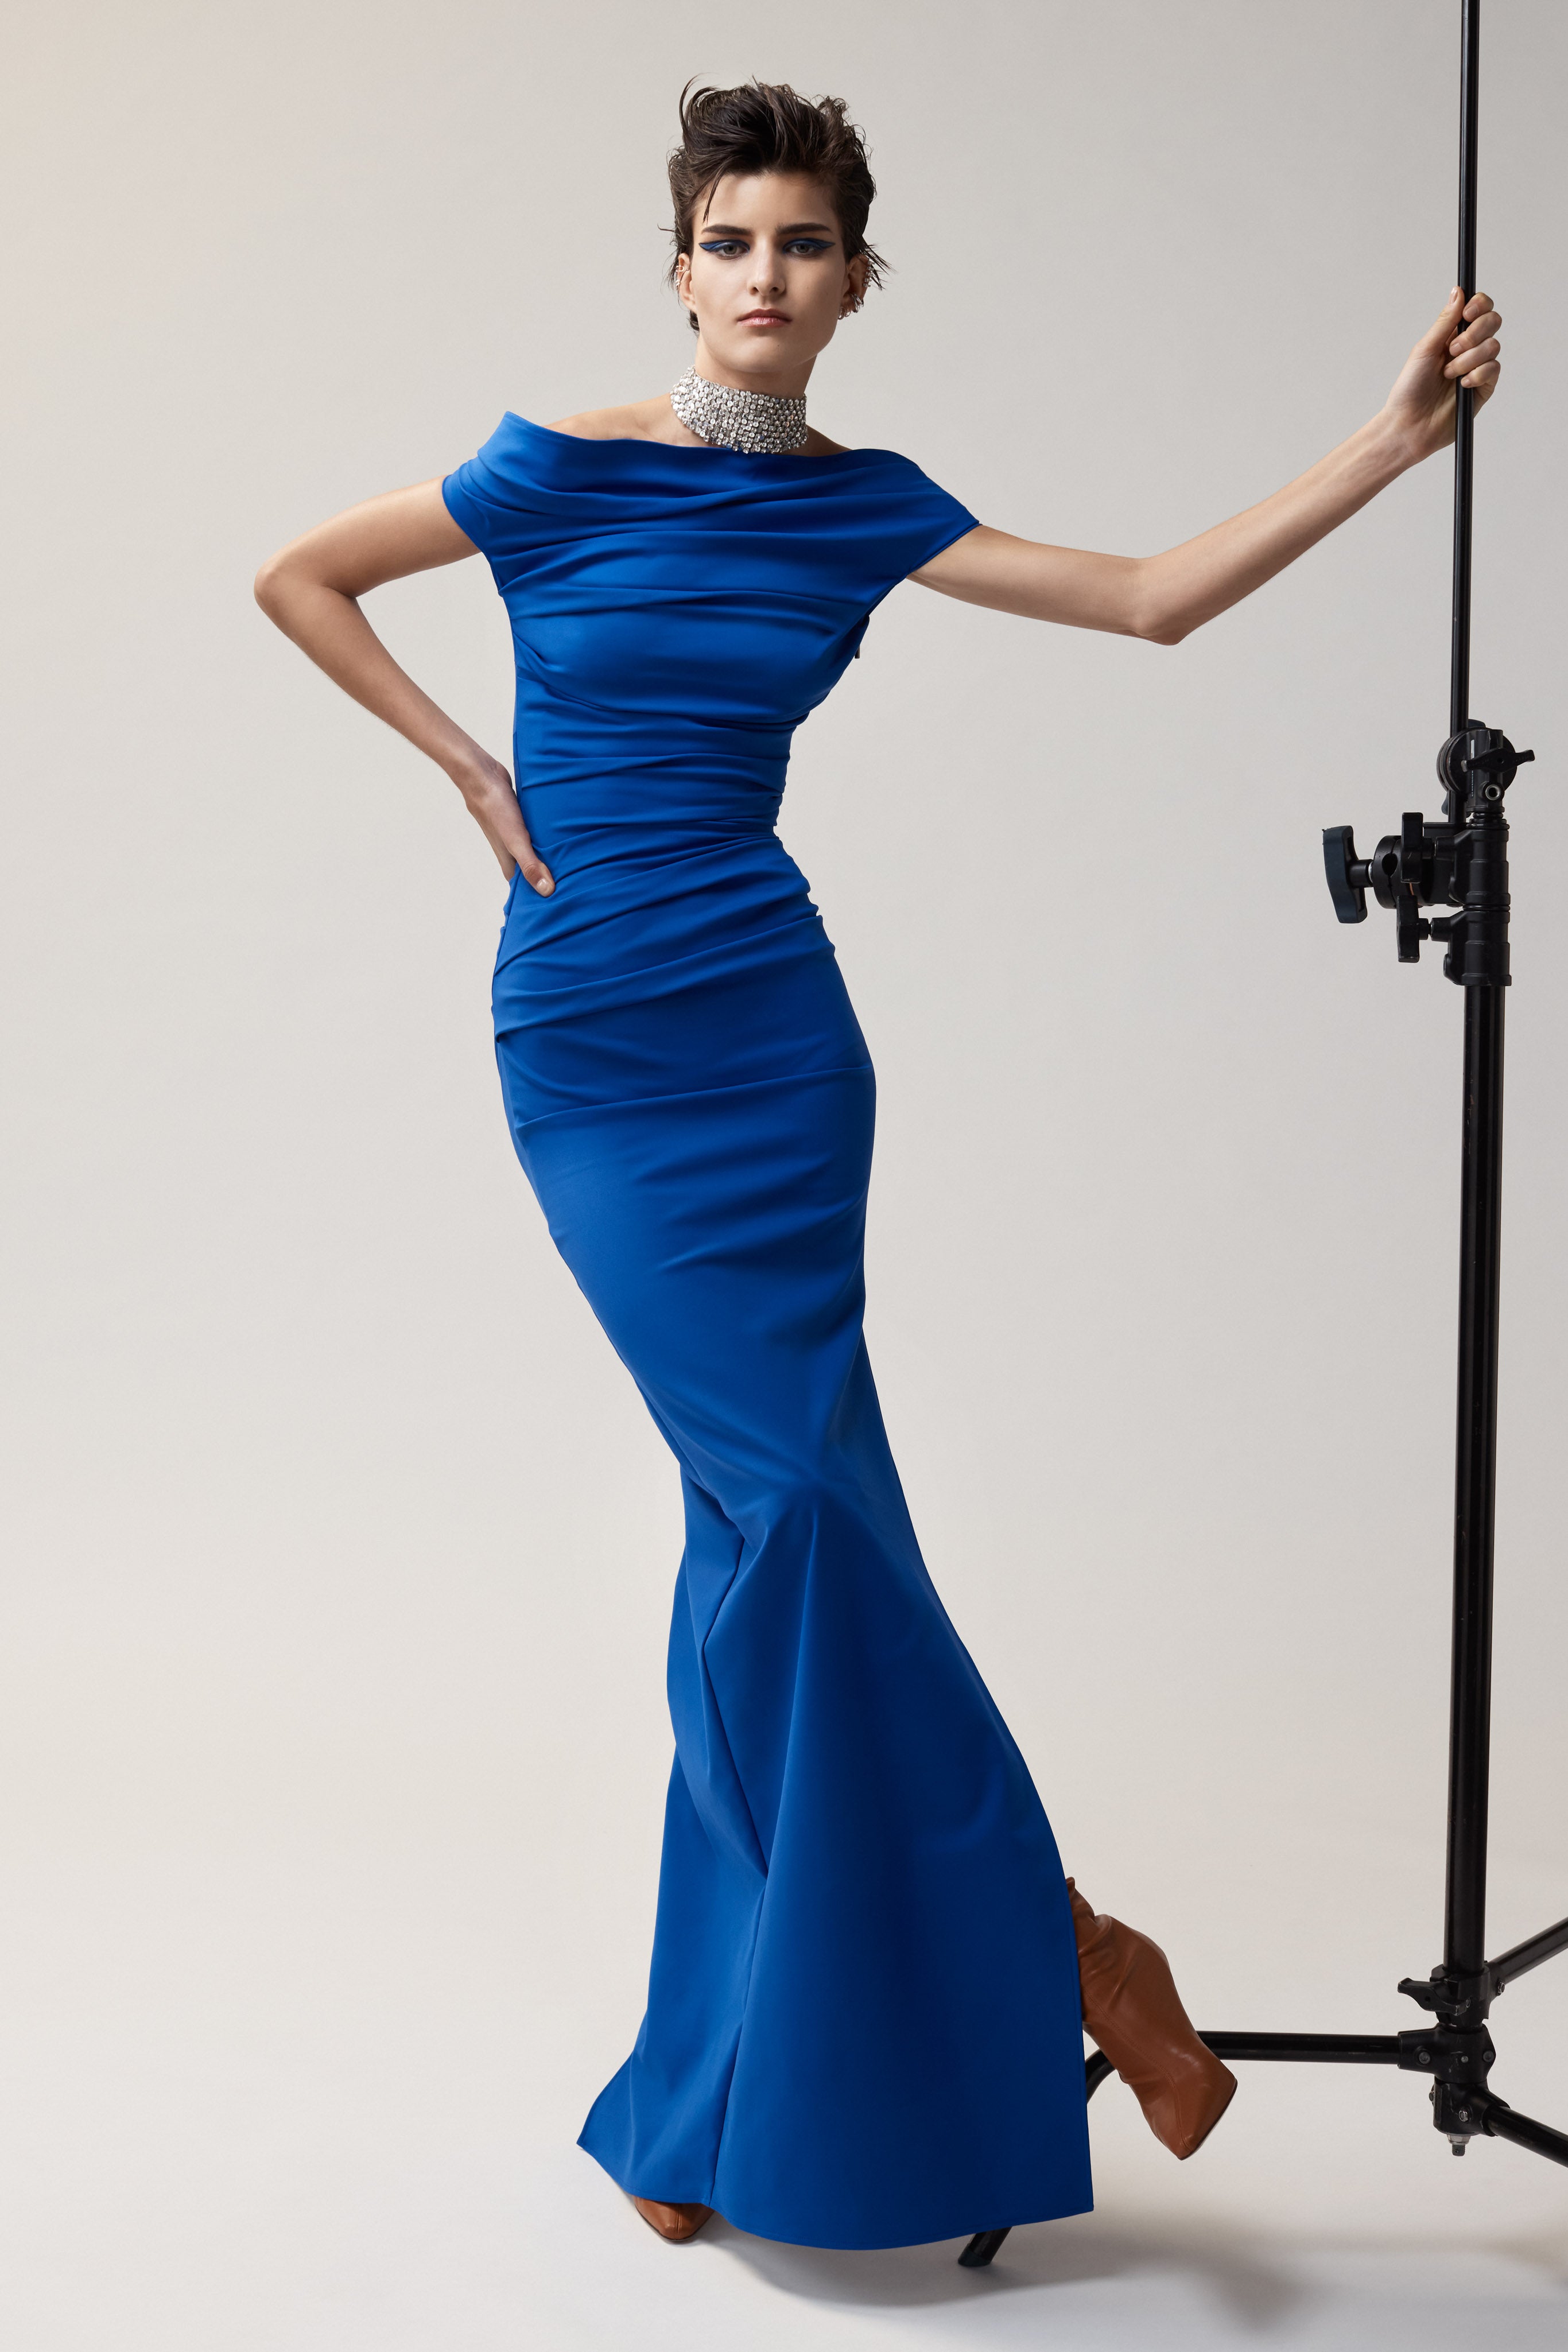 Assertion Gown in Electric